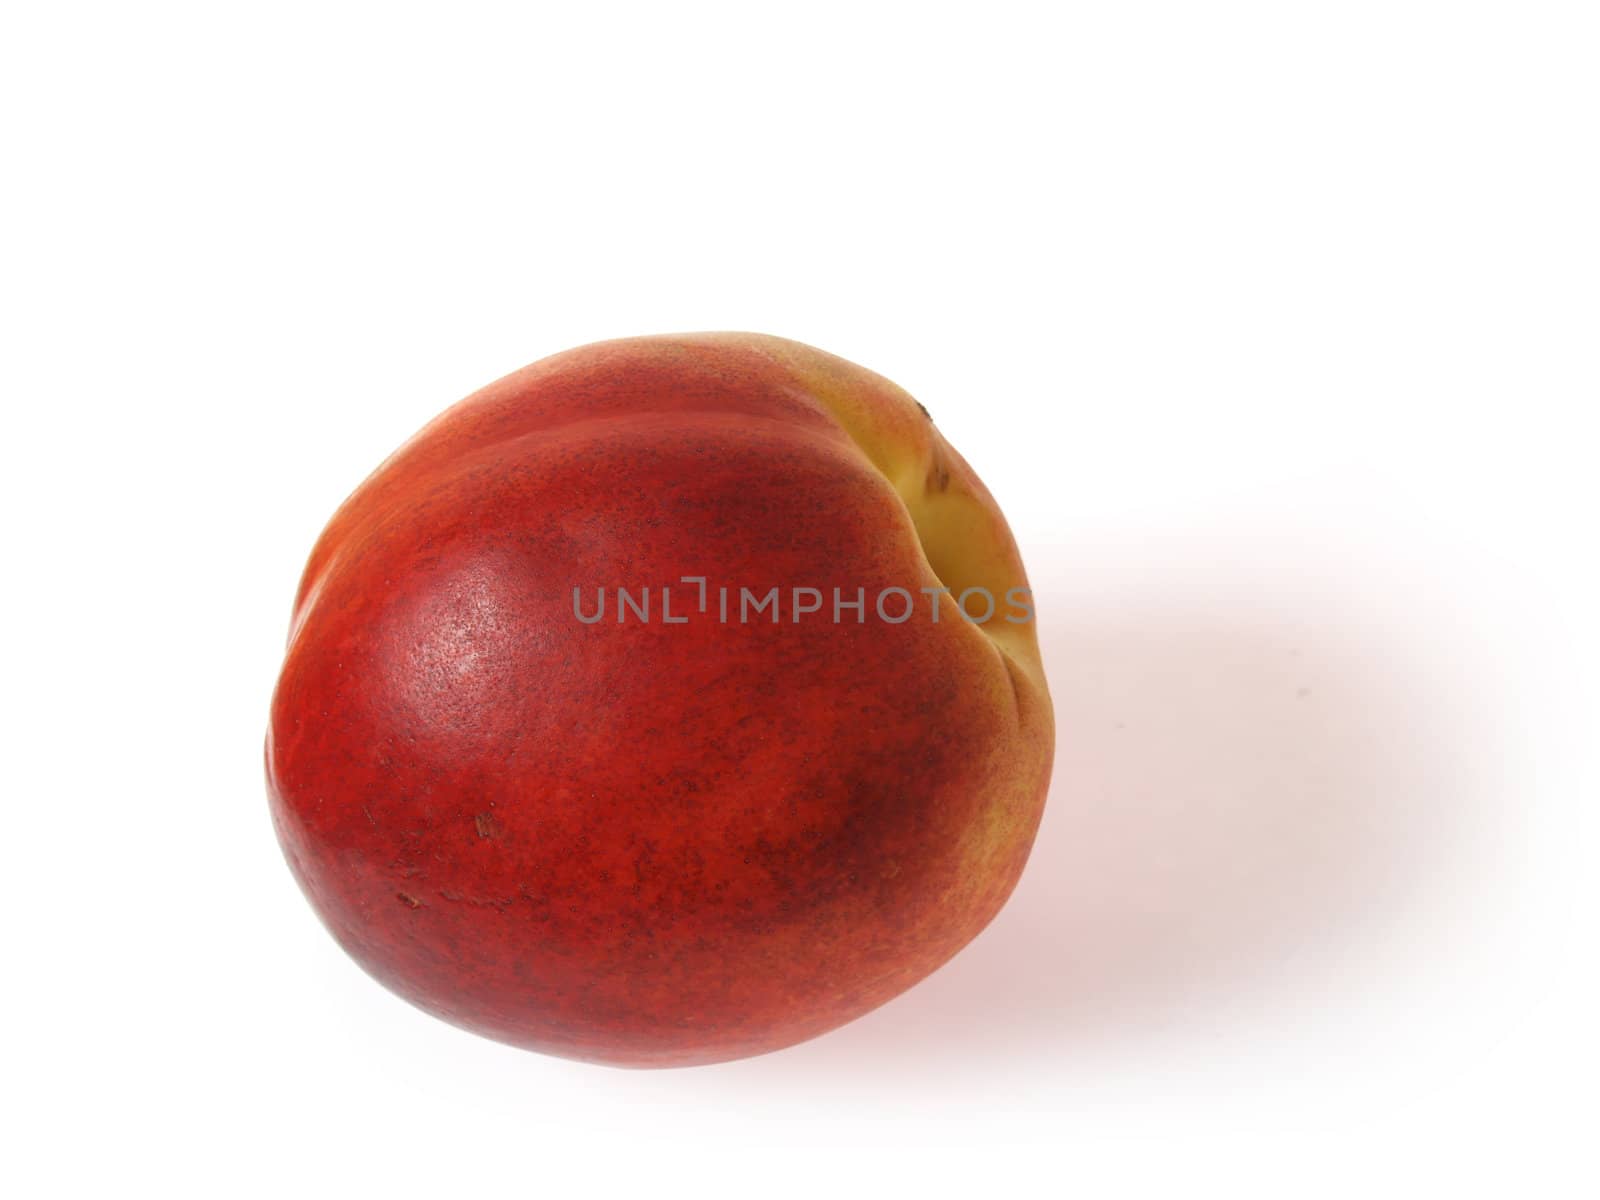 Tasty juicy nectarine on a white background with clipping mask. Shadows is not included in clipping mask